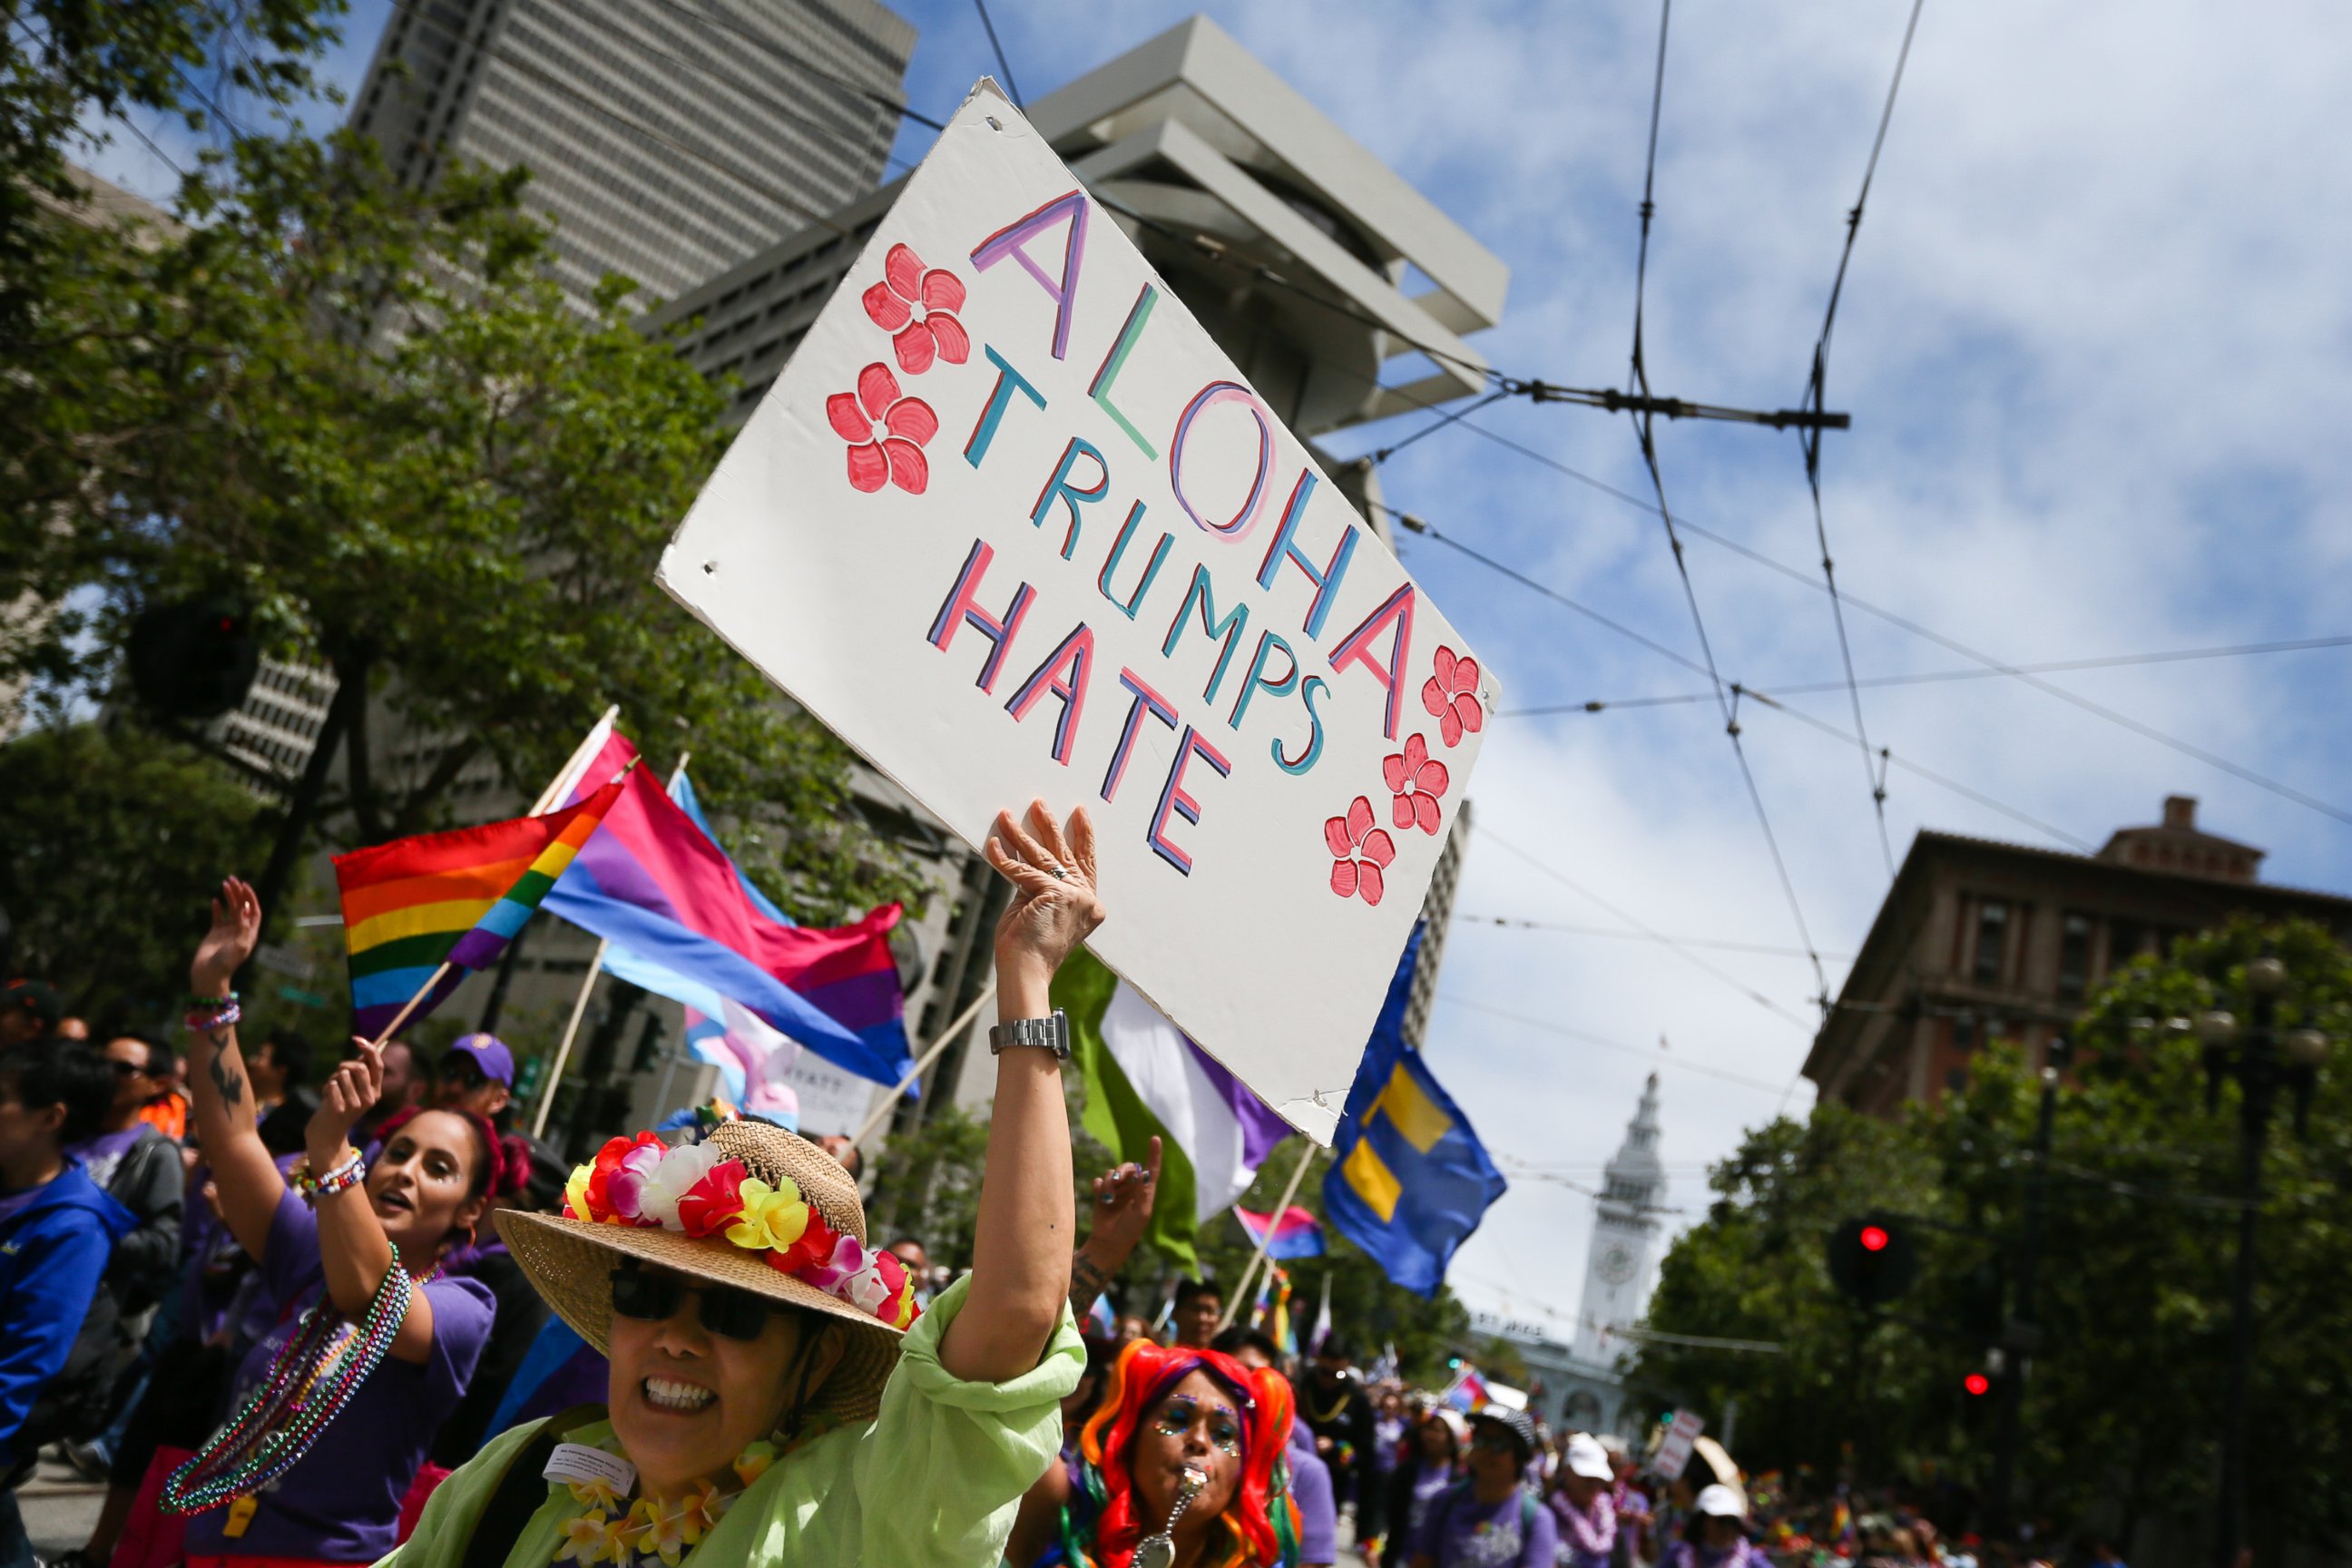 PHOTO: A woman holds a sign saying 'Aloha Trumps Hate' while participating in the annual LGBTQI Pride Parade, June 25, 2017 in San Francisco. The LGBT community descended on Market Street for the 47th annual Pride Parade.